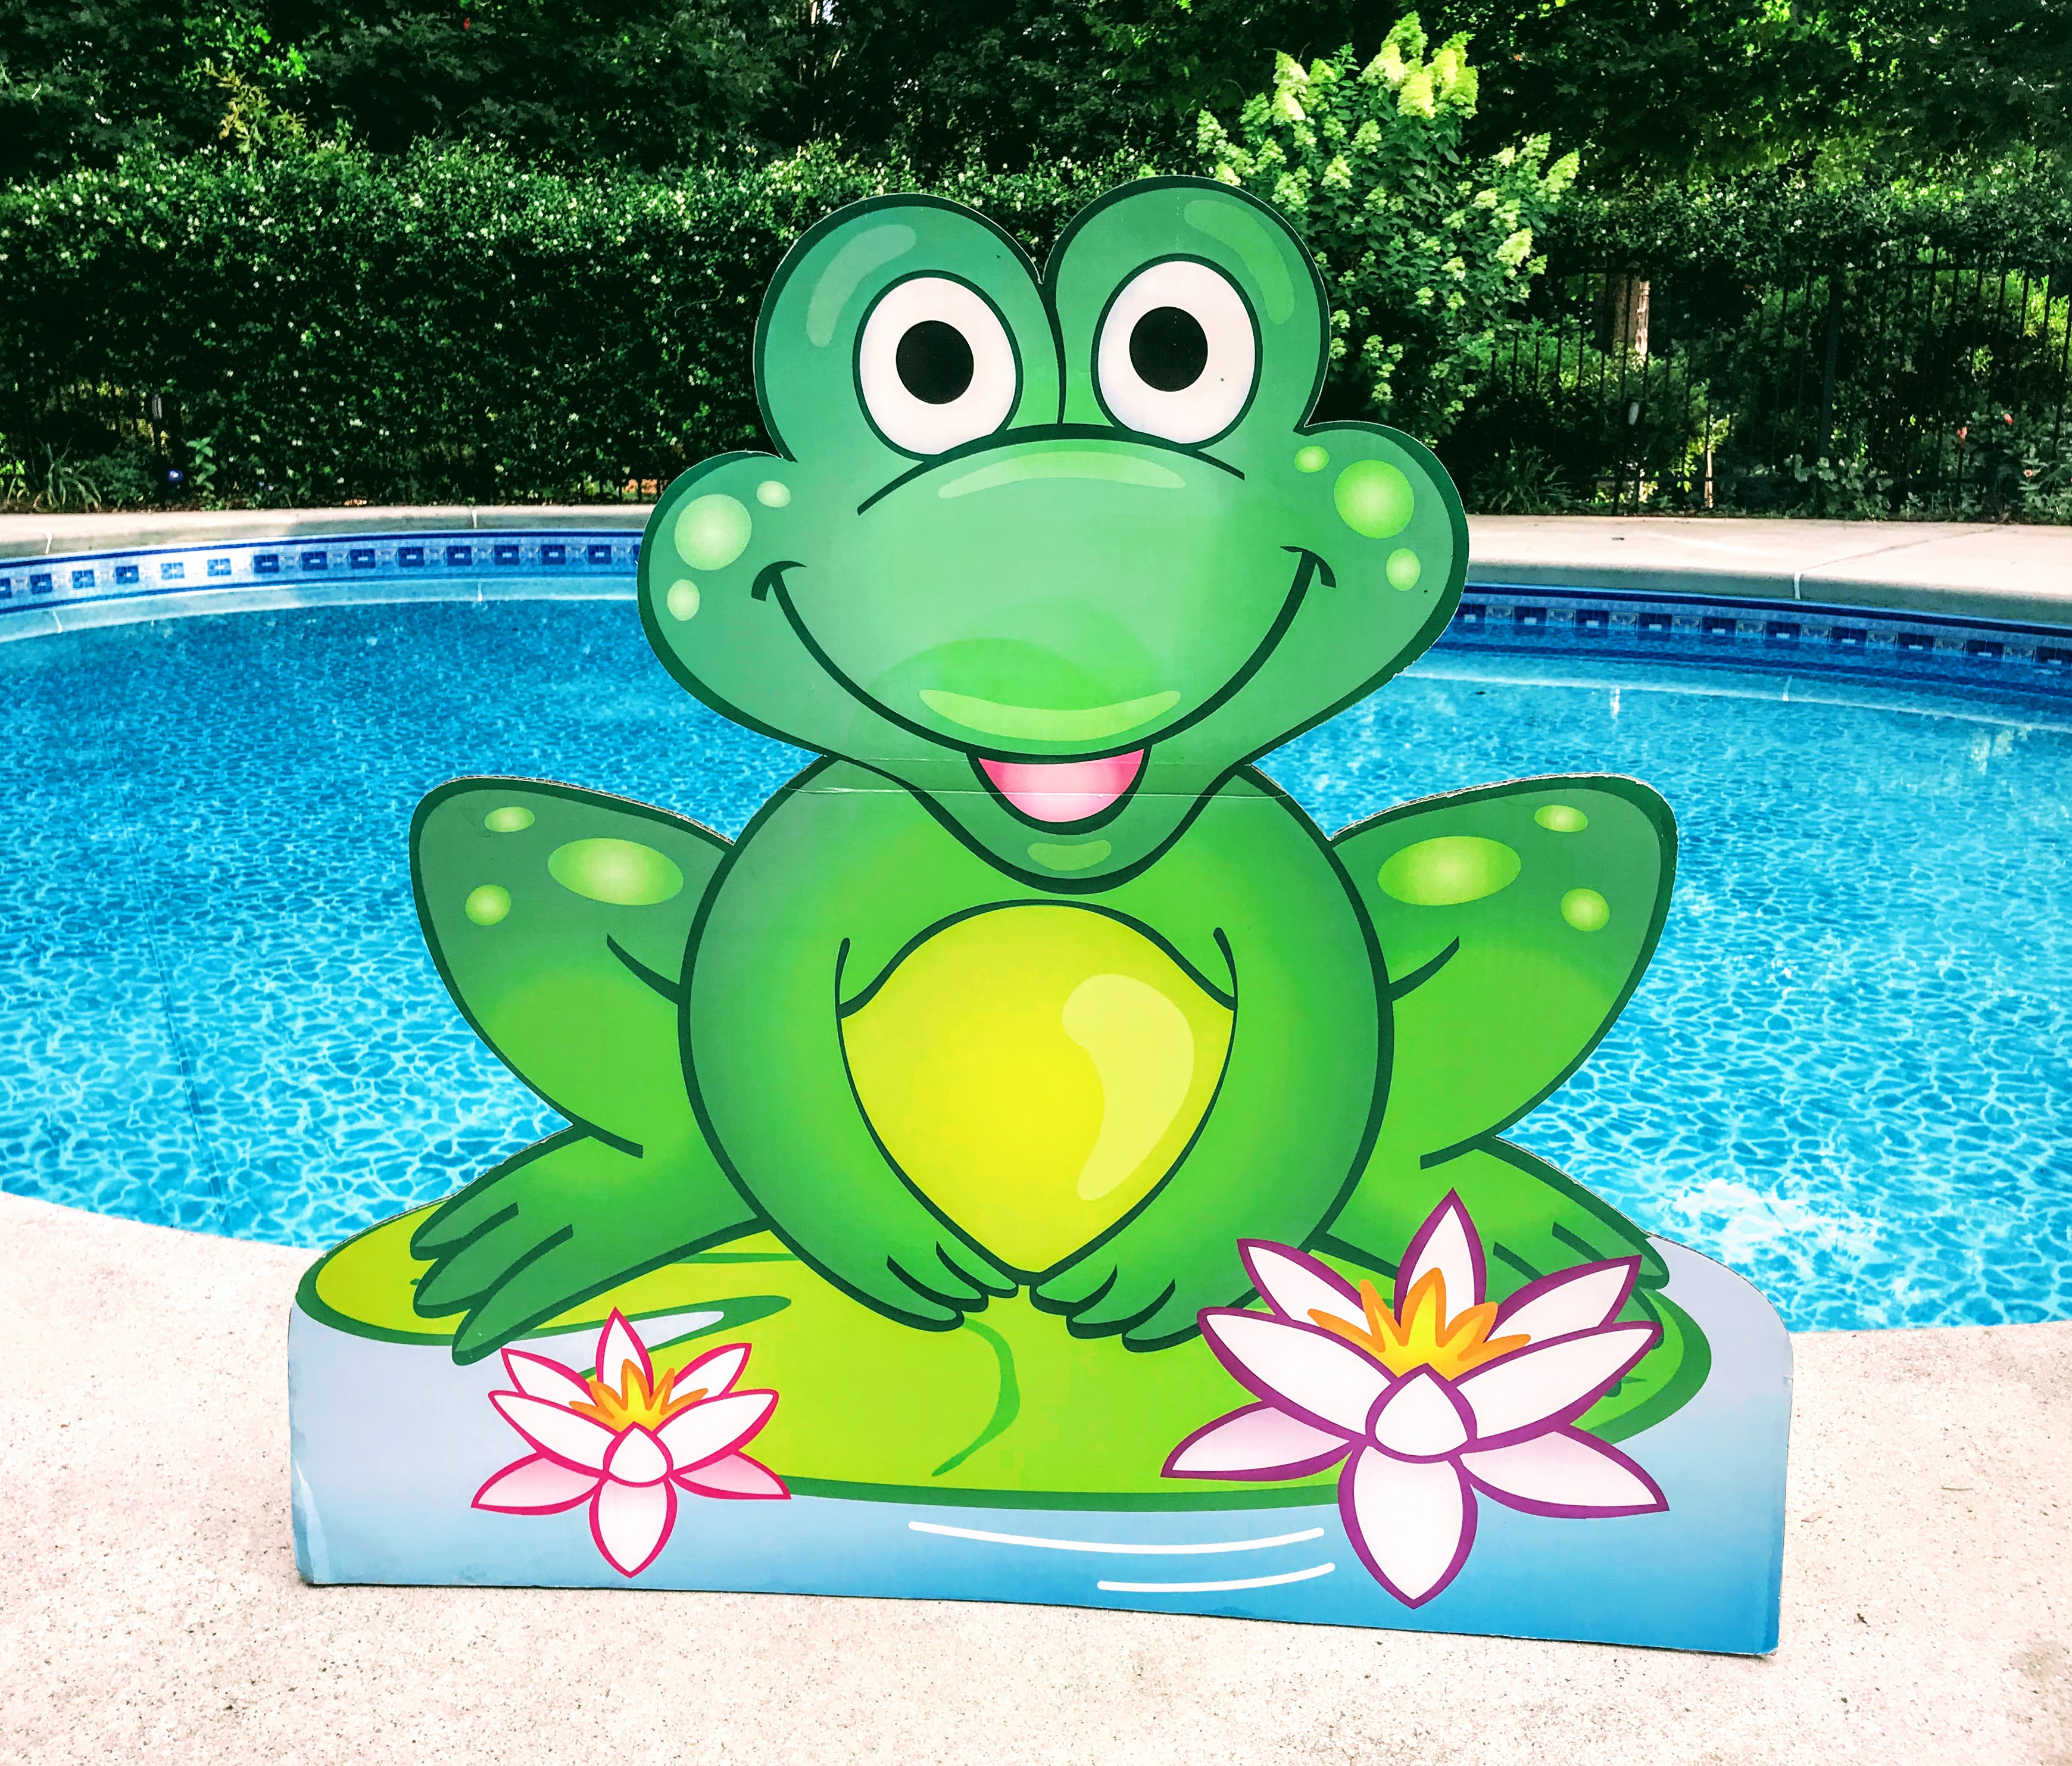 frog decoration by pool